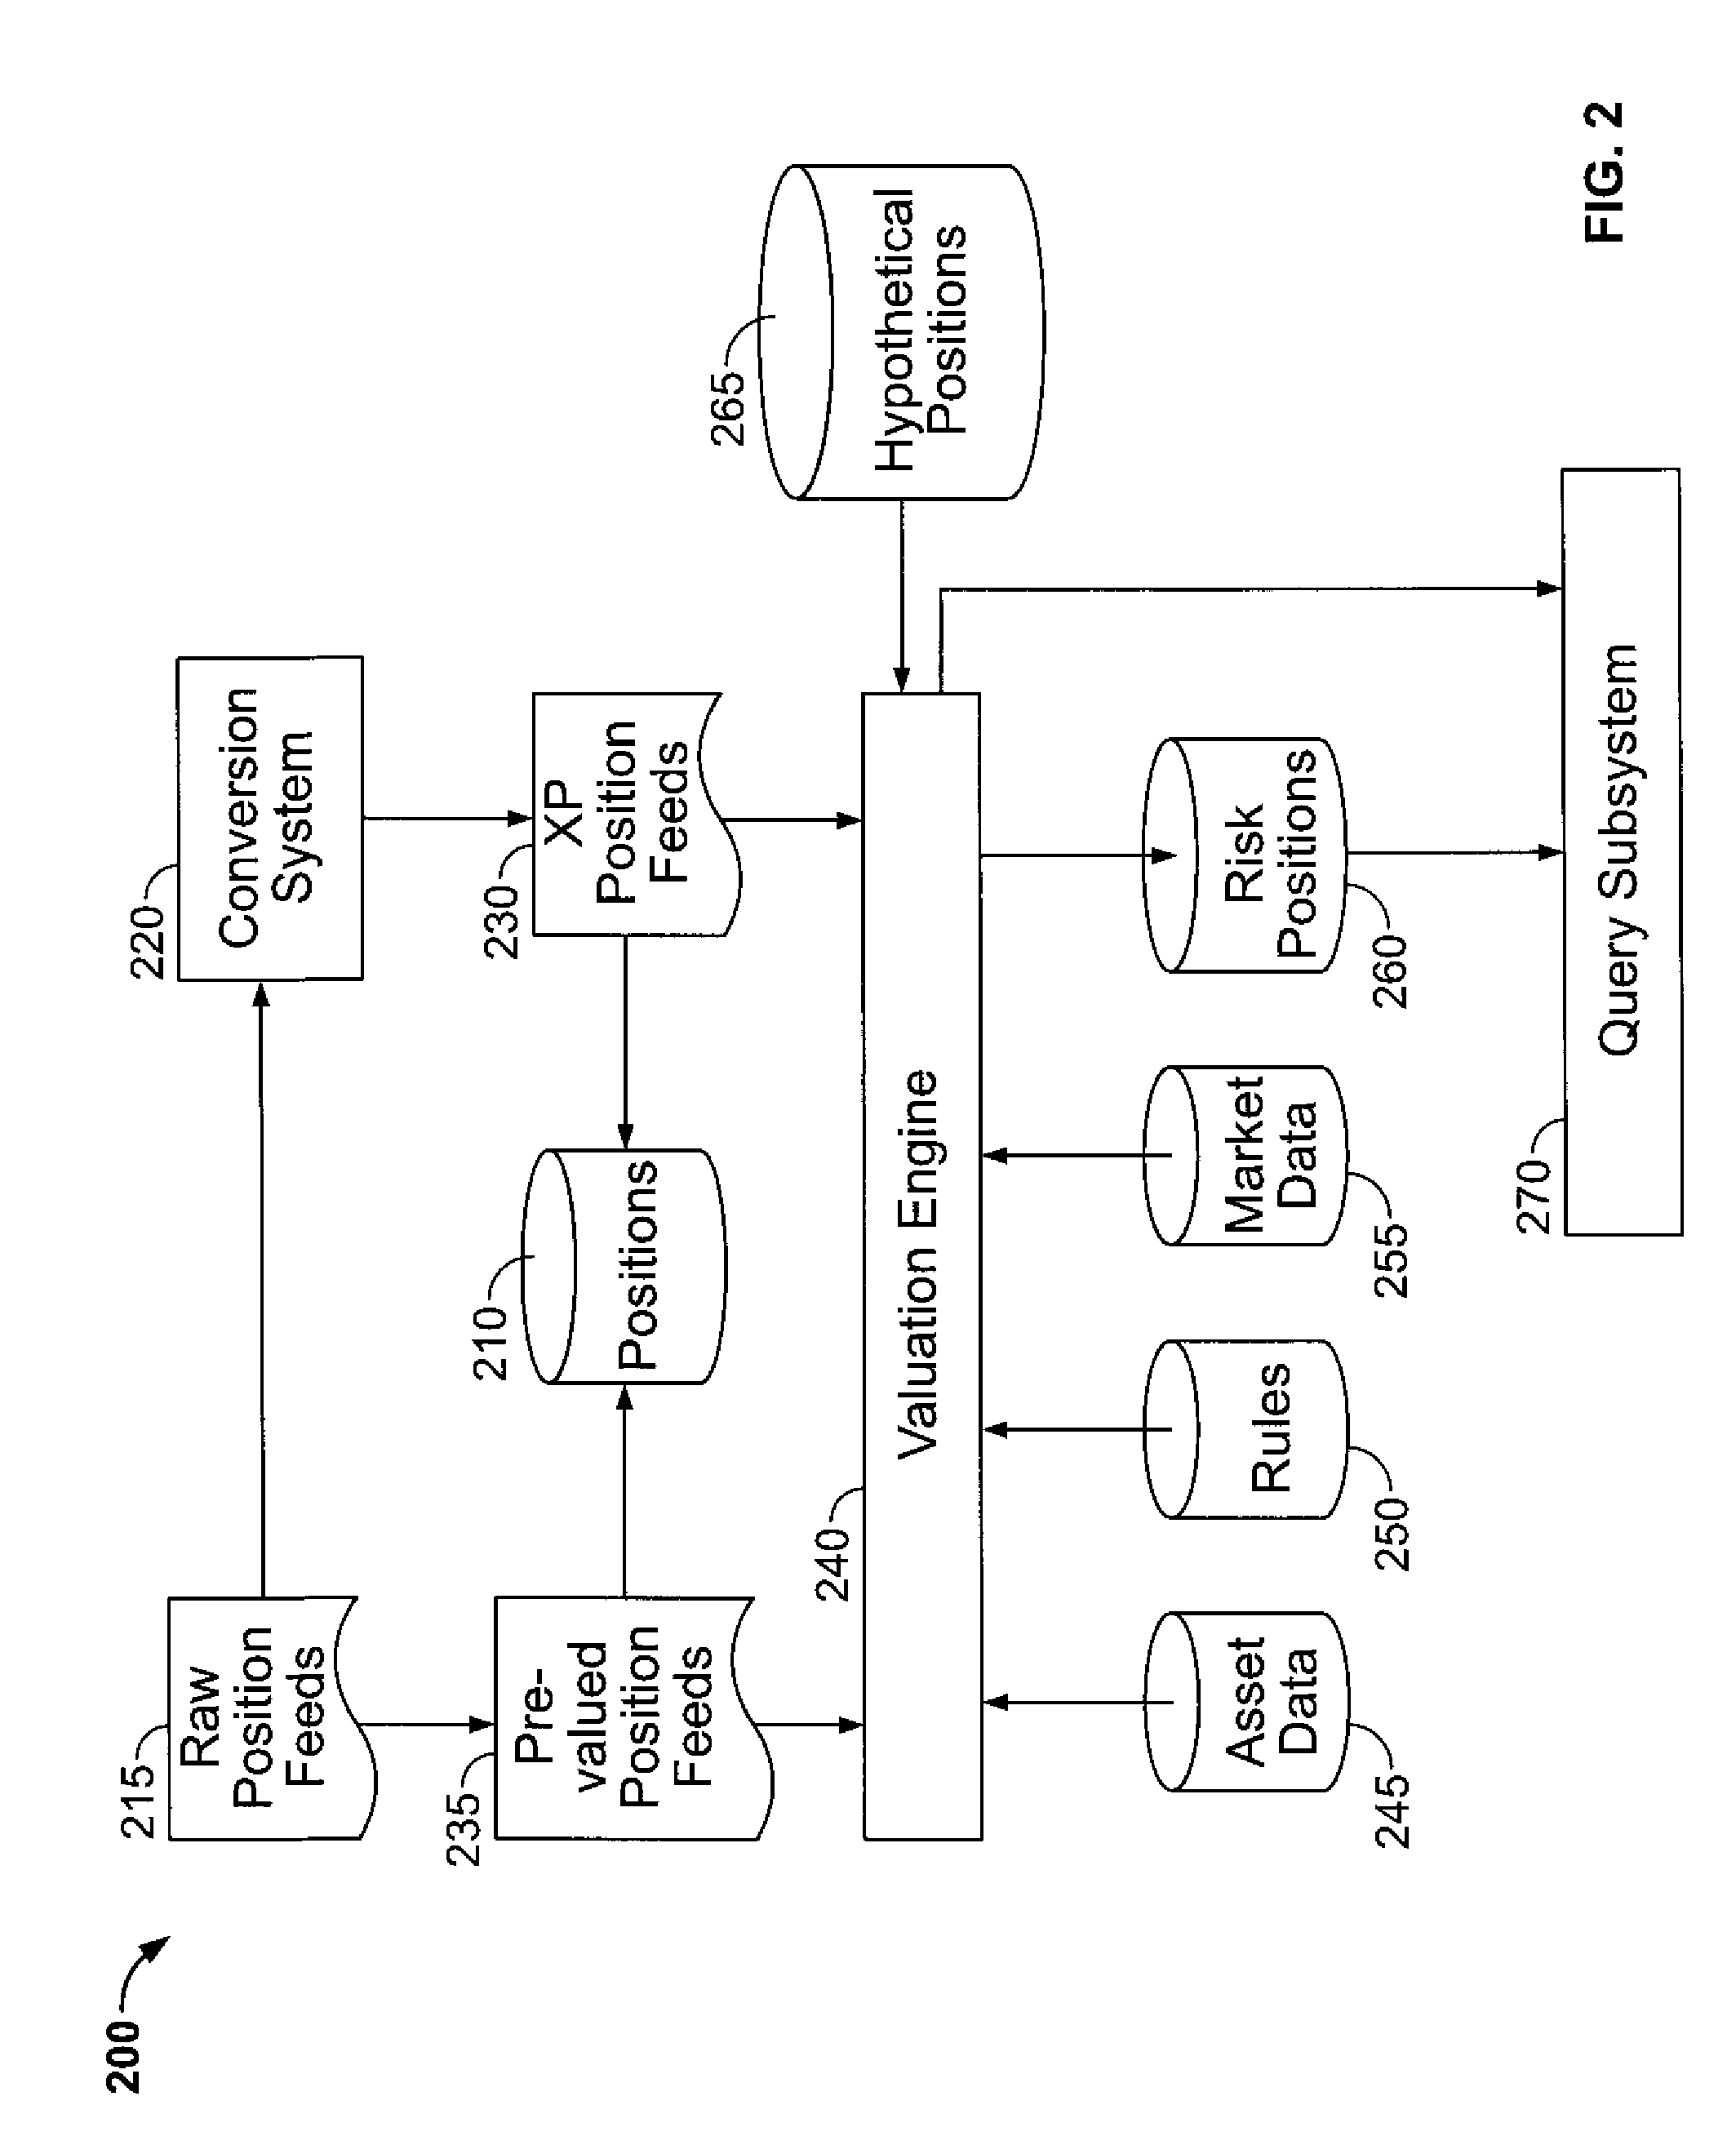 System and method for multi-dimensional risk analysis